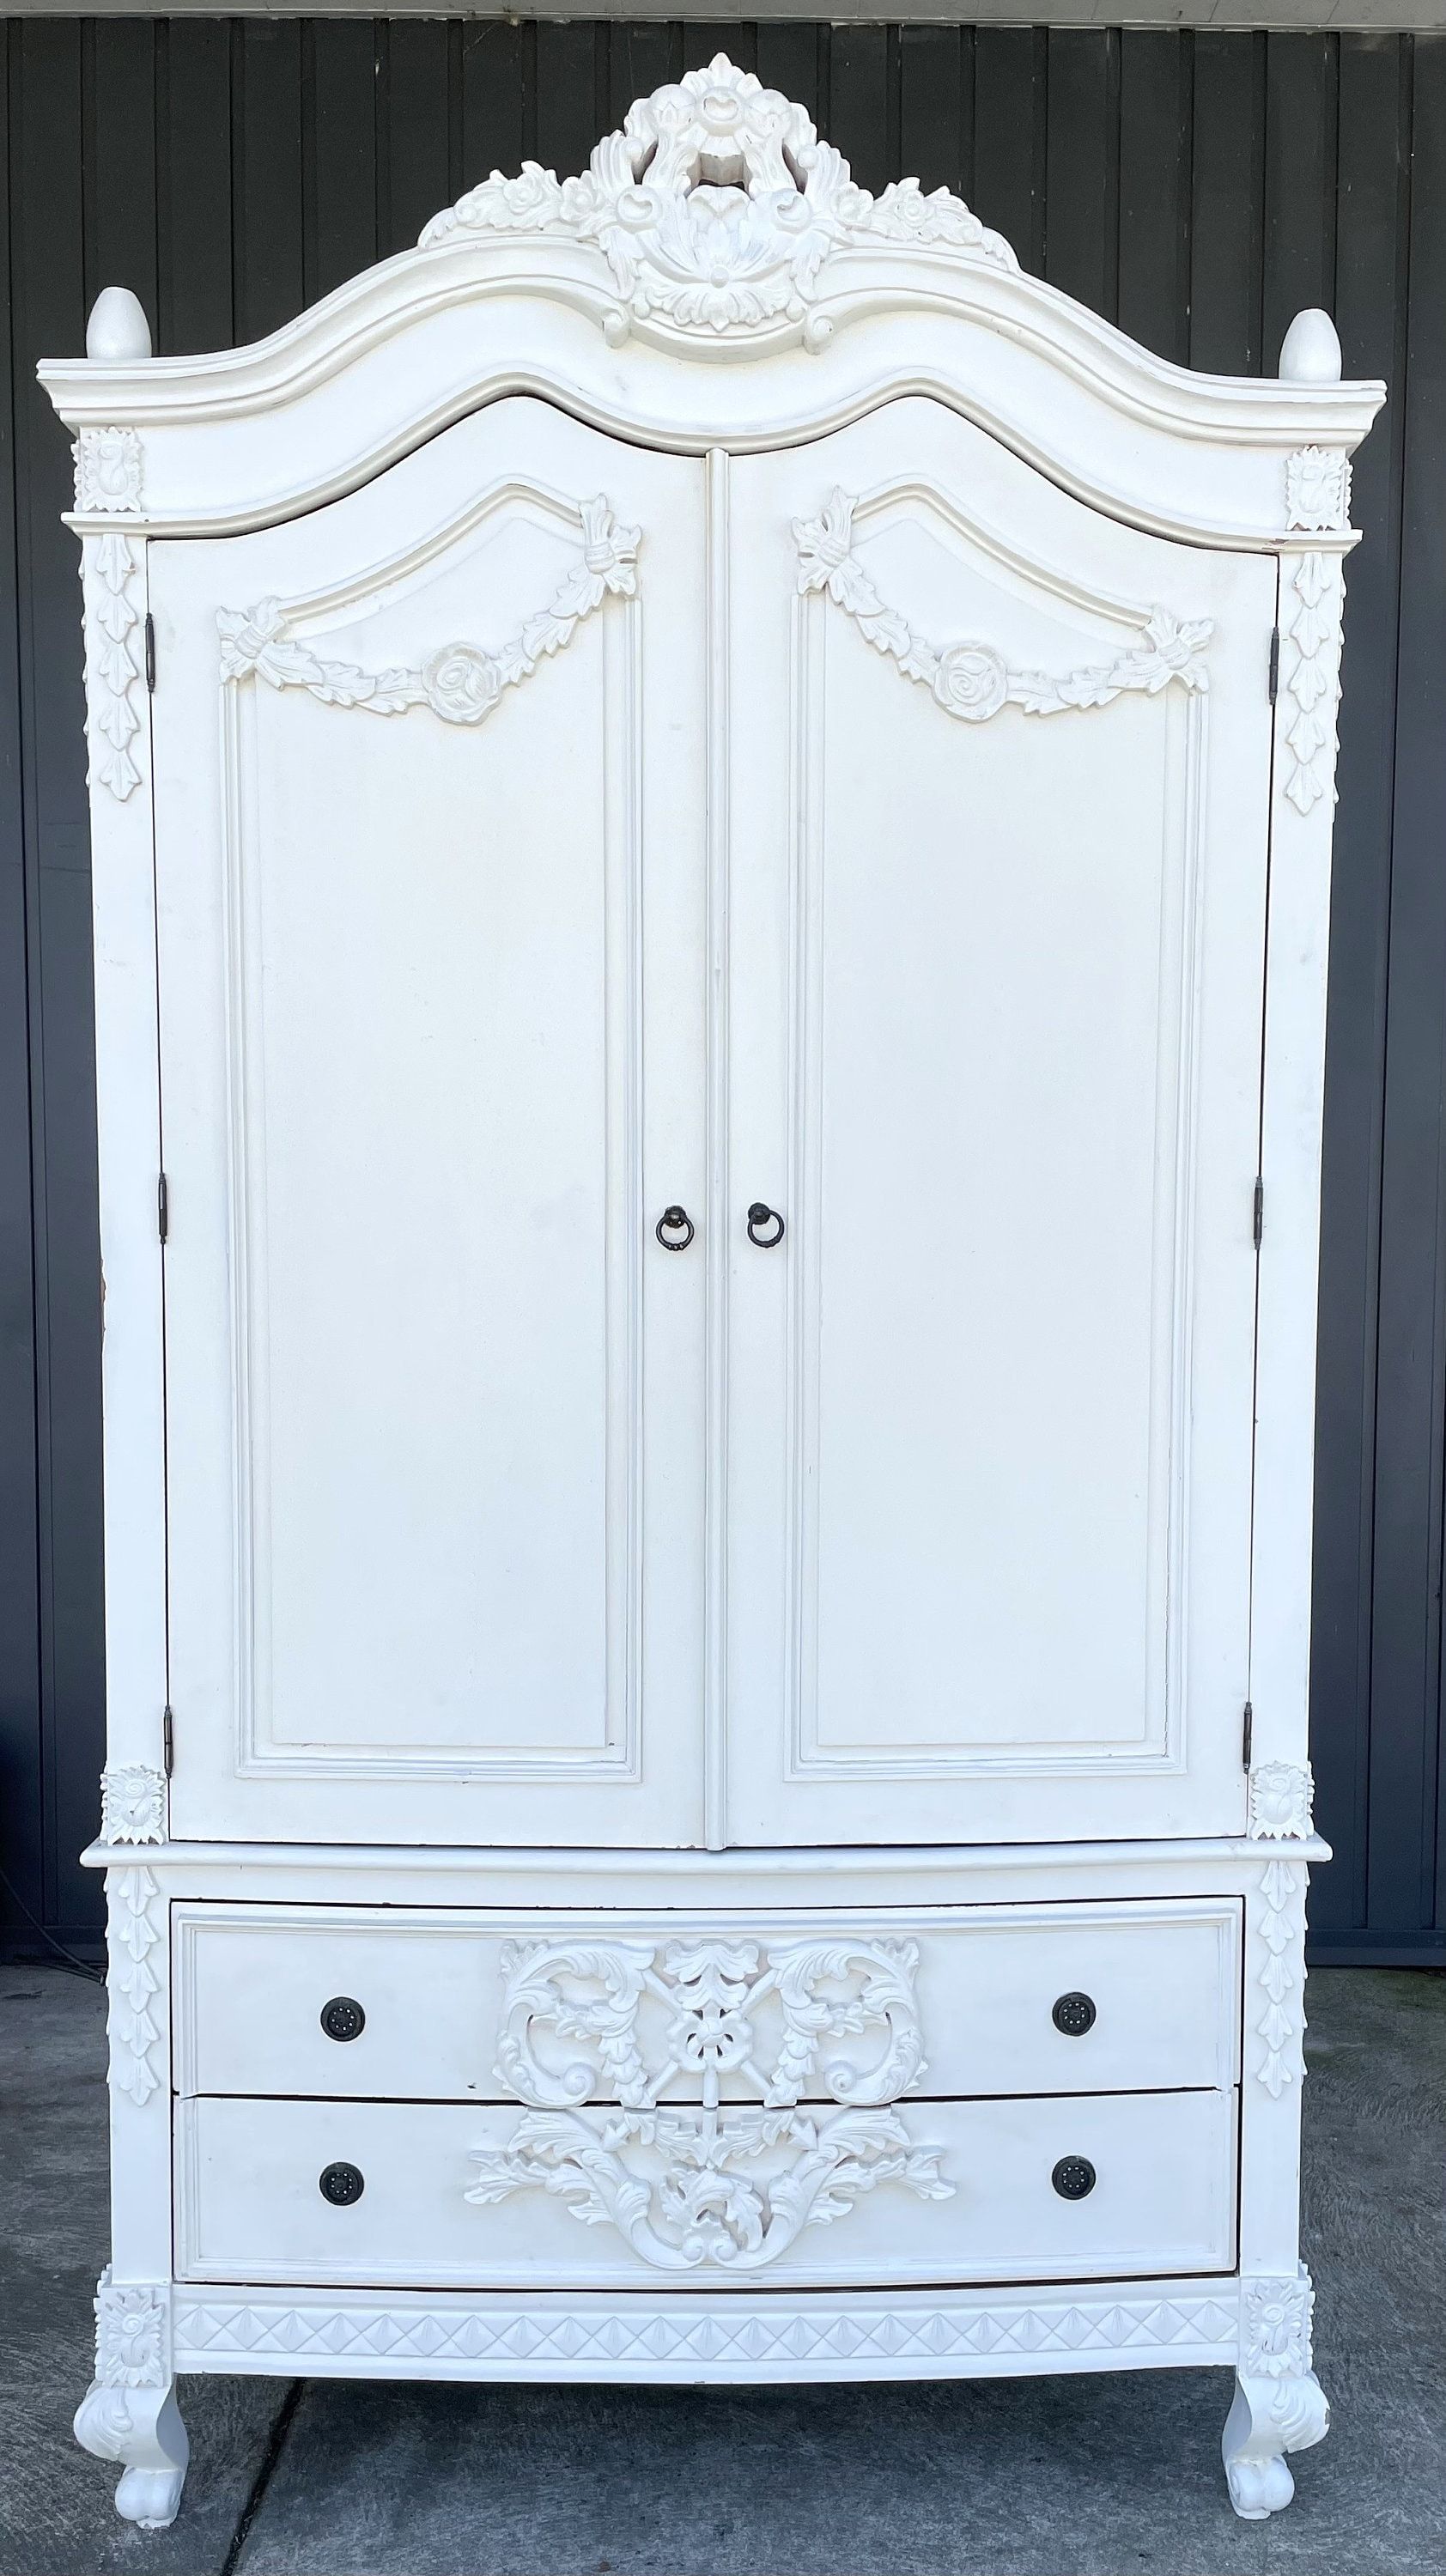 Shabby Chic Distressed White Vintage Style French Baroque – Etsy Inside White French Armoire Wardrobes (View 5 of 15)